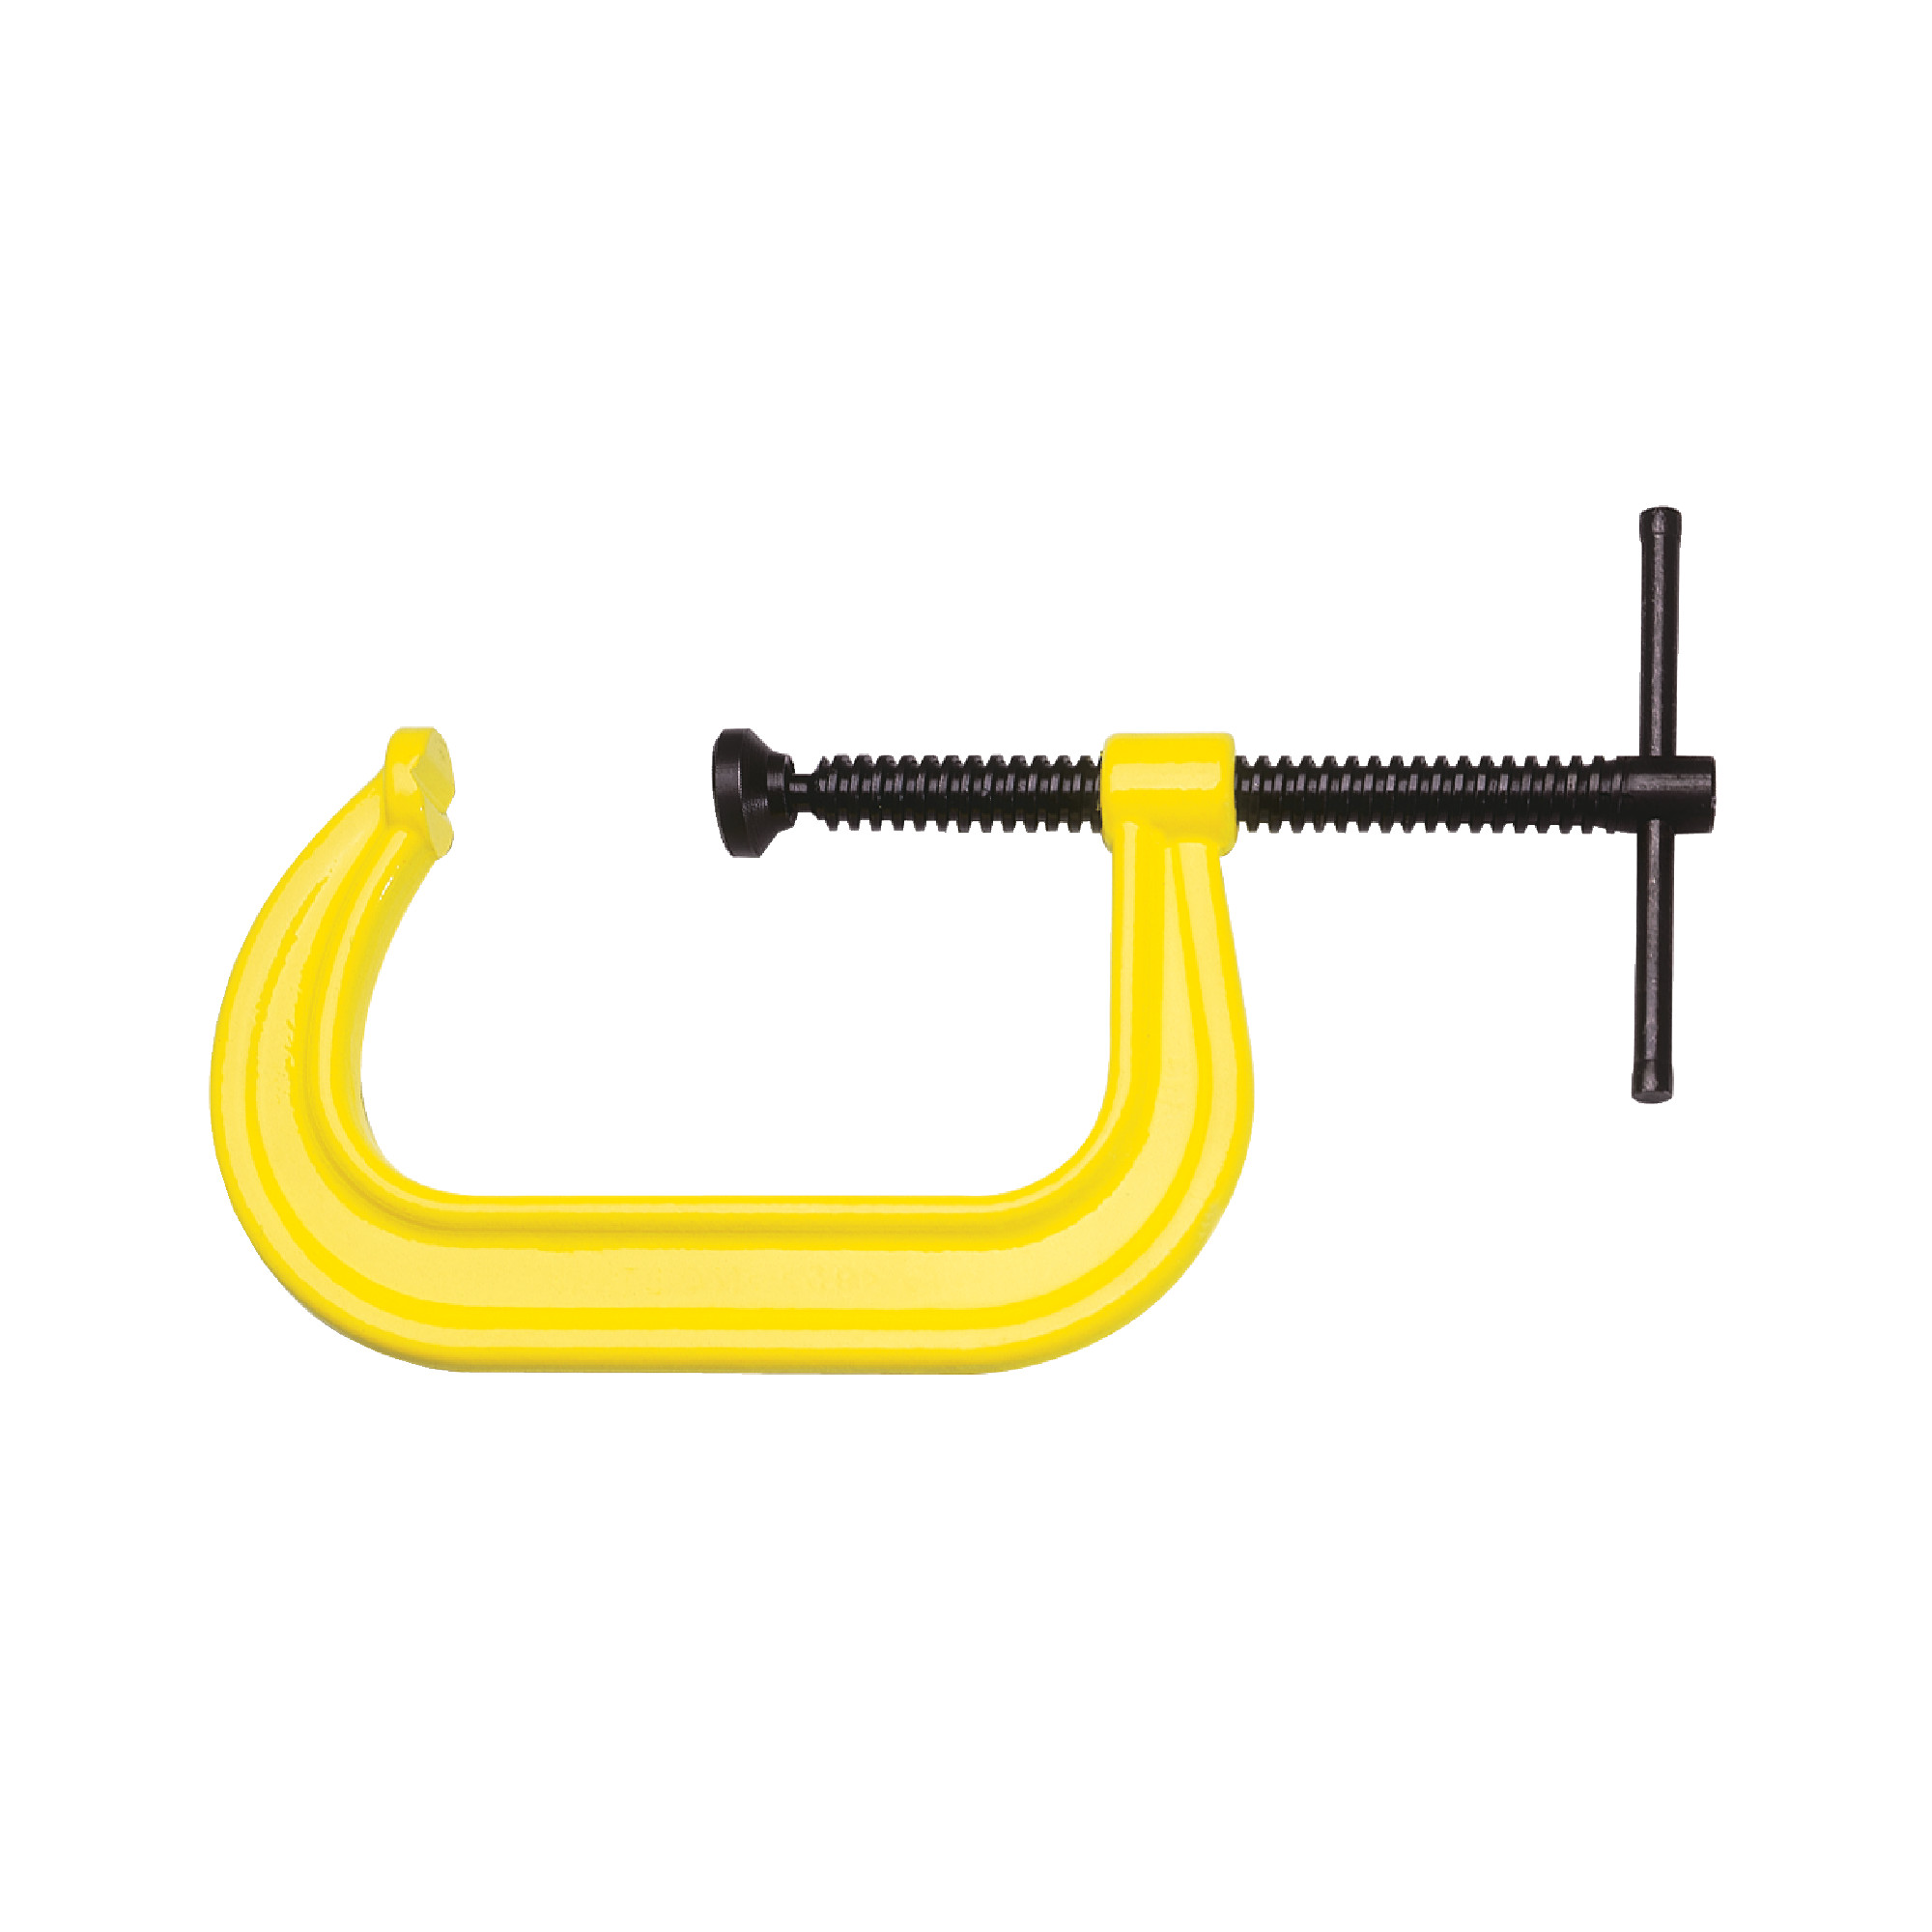 Extra Deep Throat Safety C-Clamp